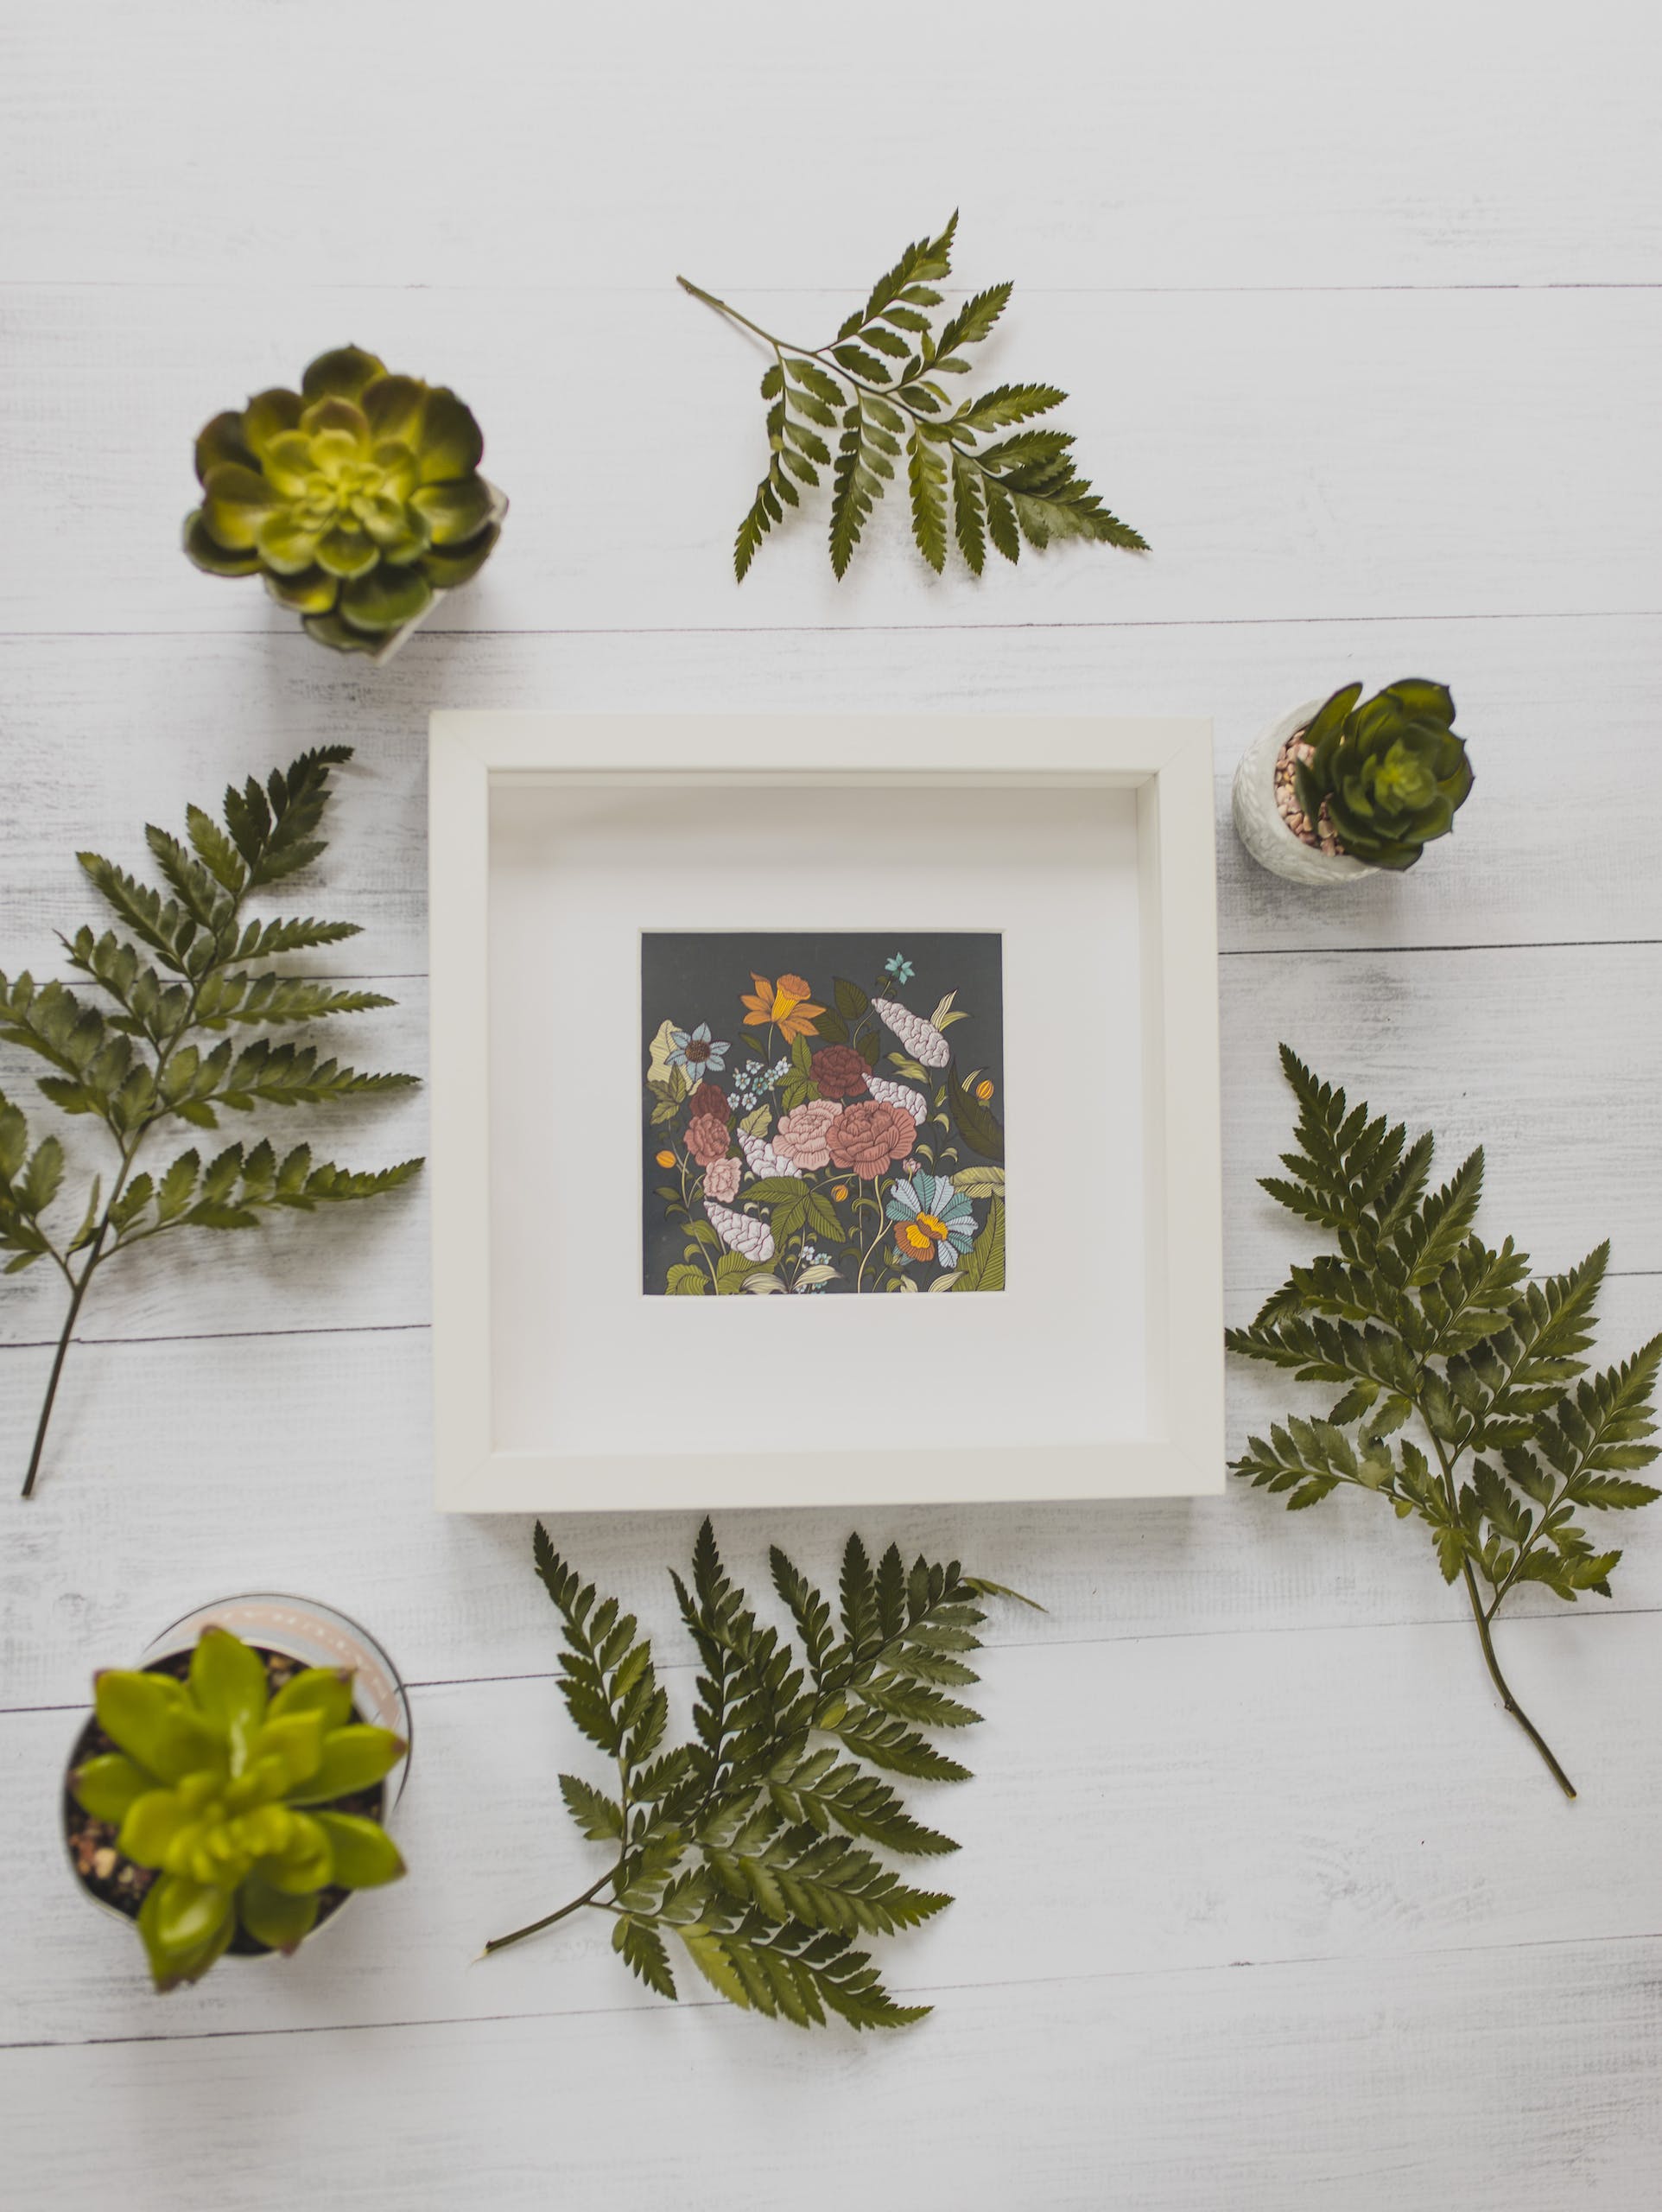 Top view composition of white square frame with floral picture placed on white wooden desk amidst green lush succulents and plant leaves